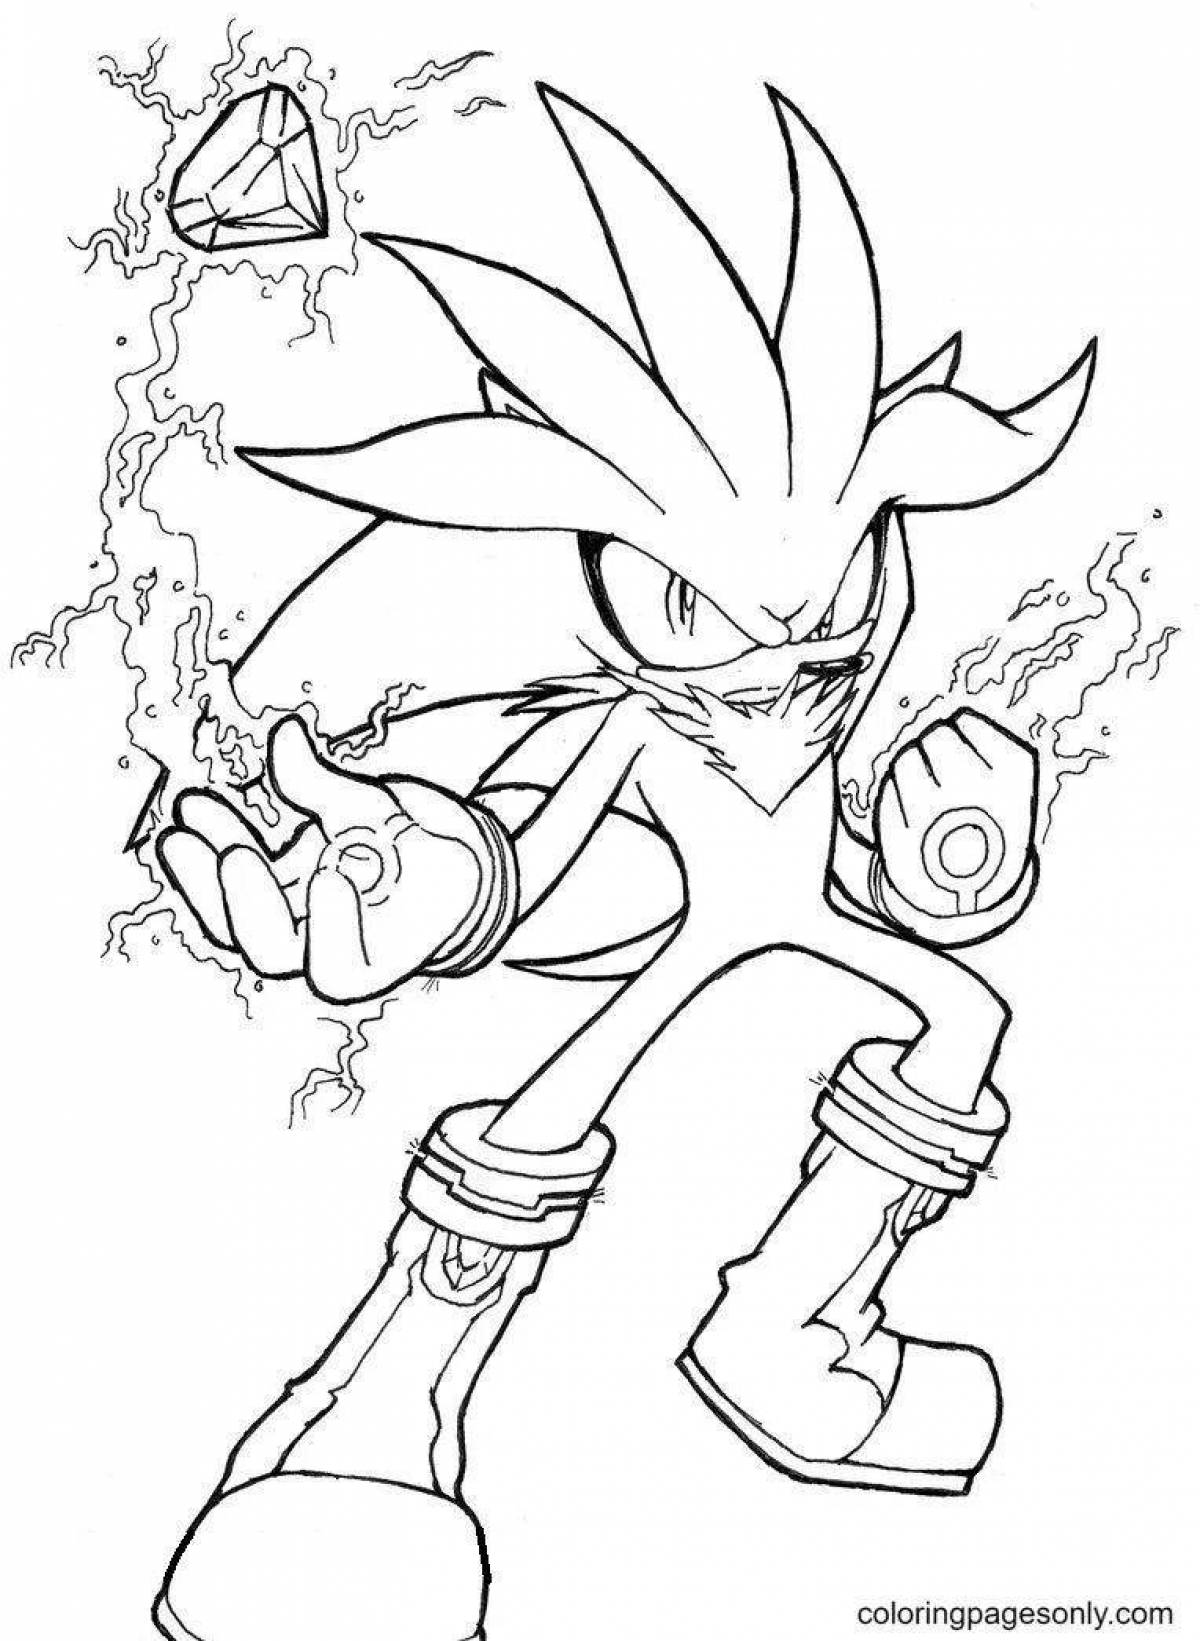 Excellent darkspine sonic coloring page